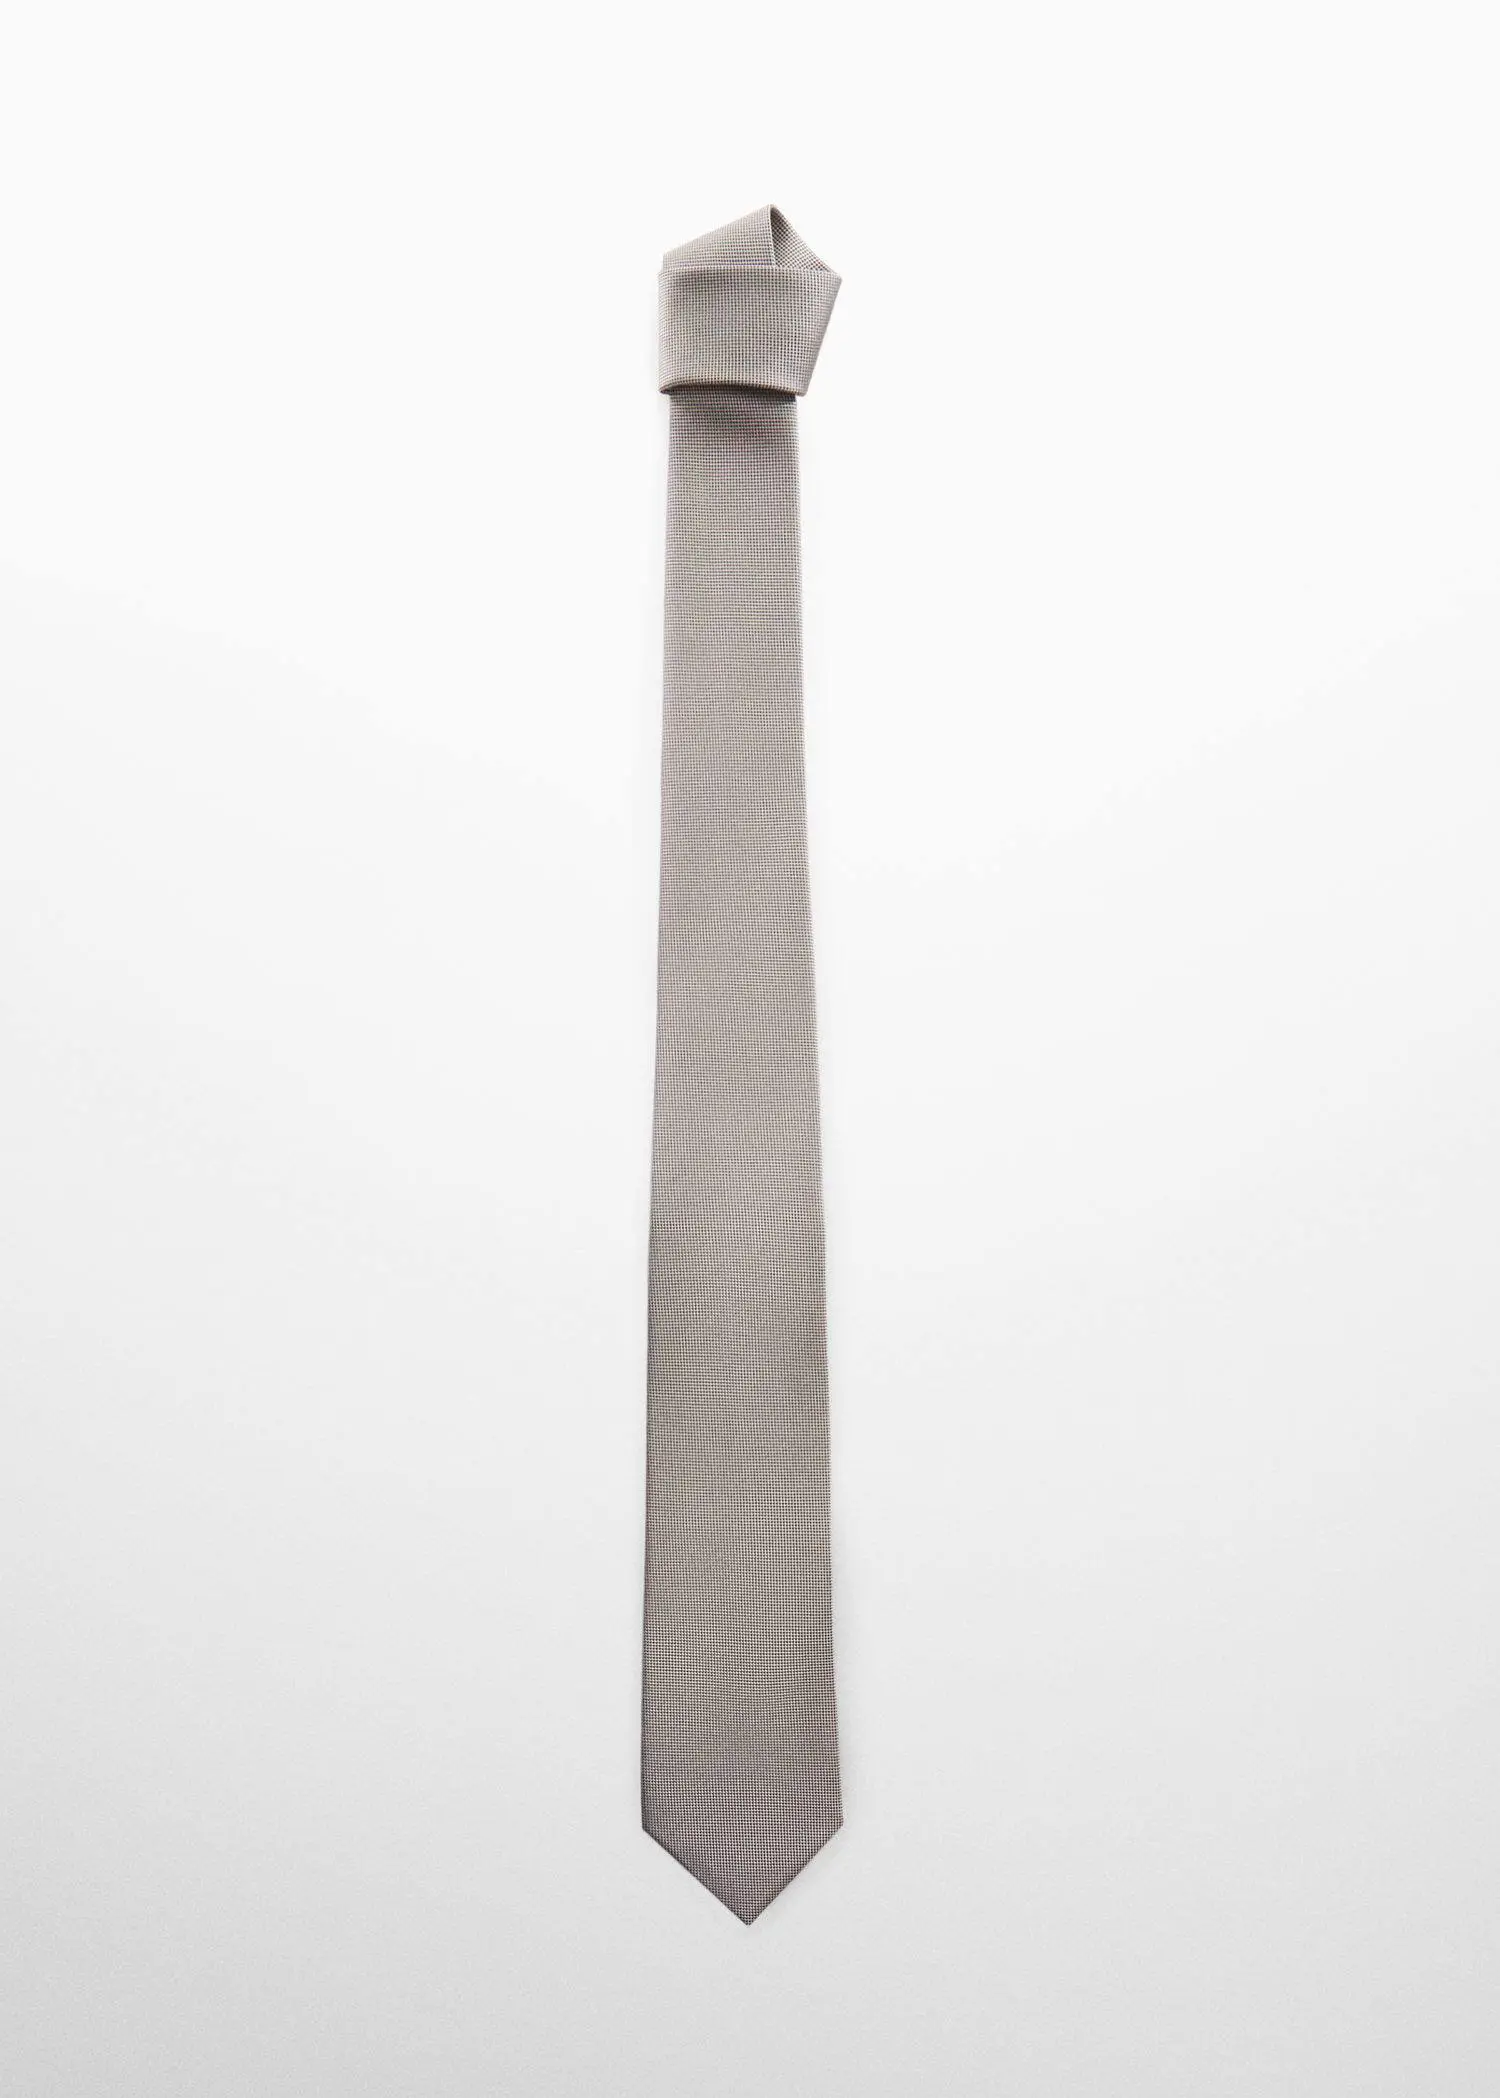 Mango Micro-print tie. a long silver tie hanging on a white wall. 